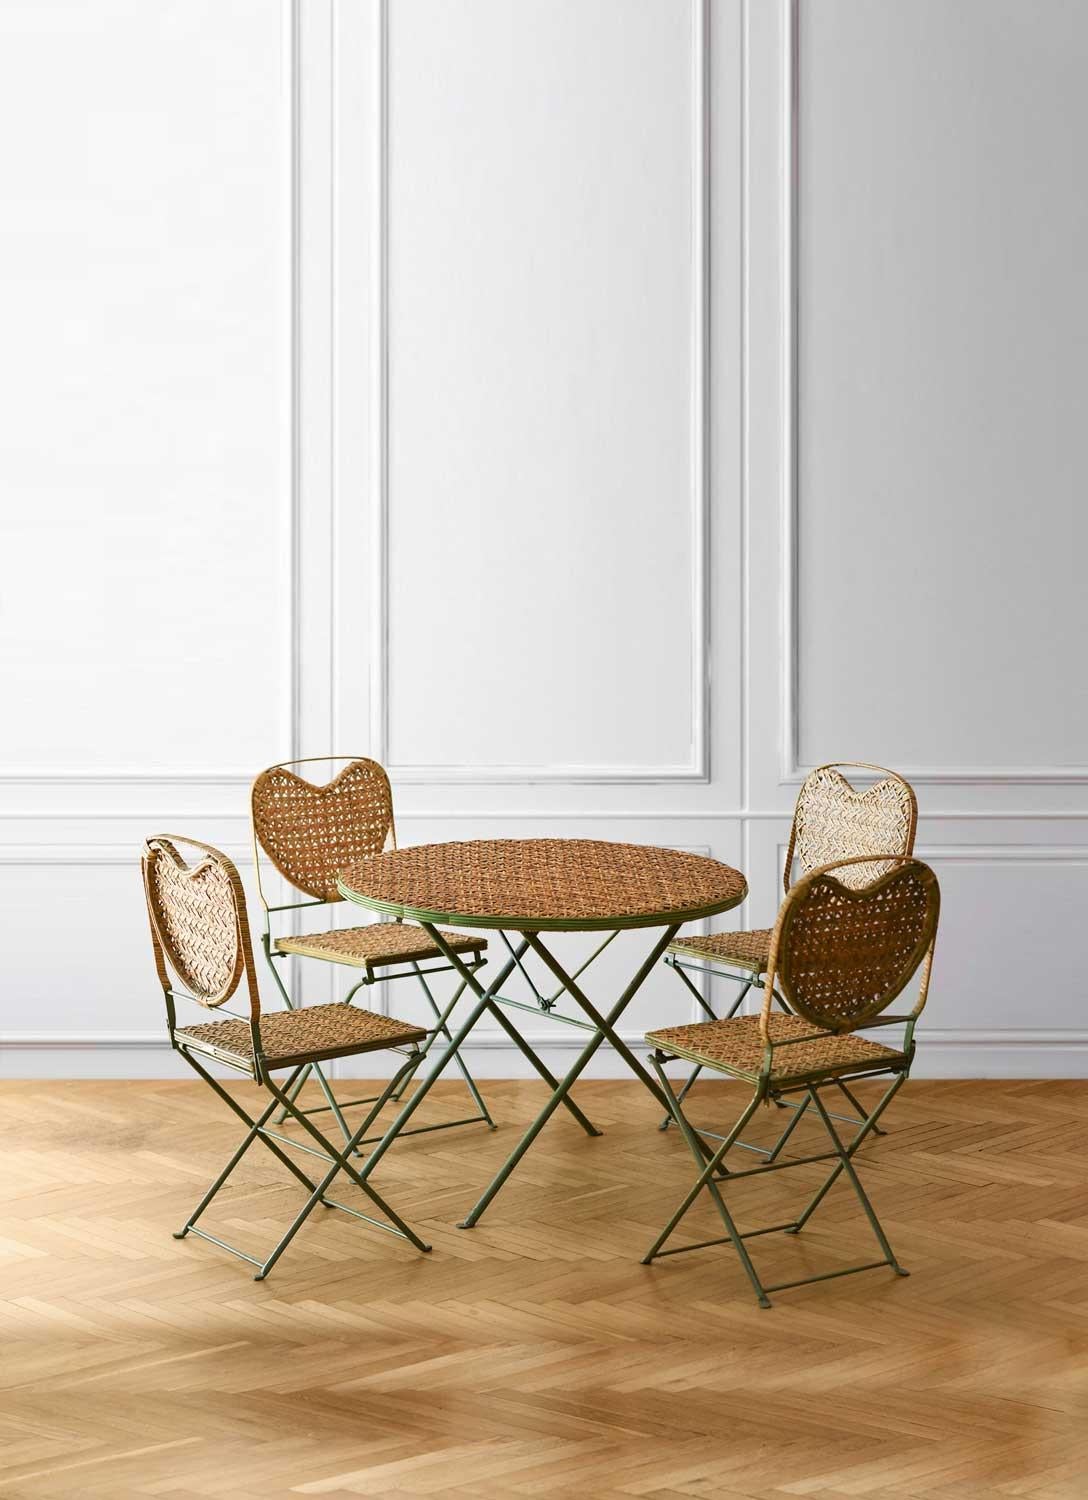  Set “Un Jardine en Plus” Paris Table and 4 folding chairs in wicker and metal 4